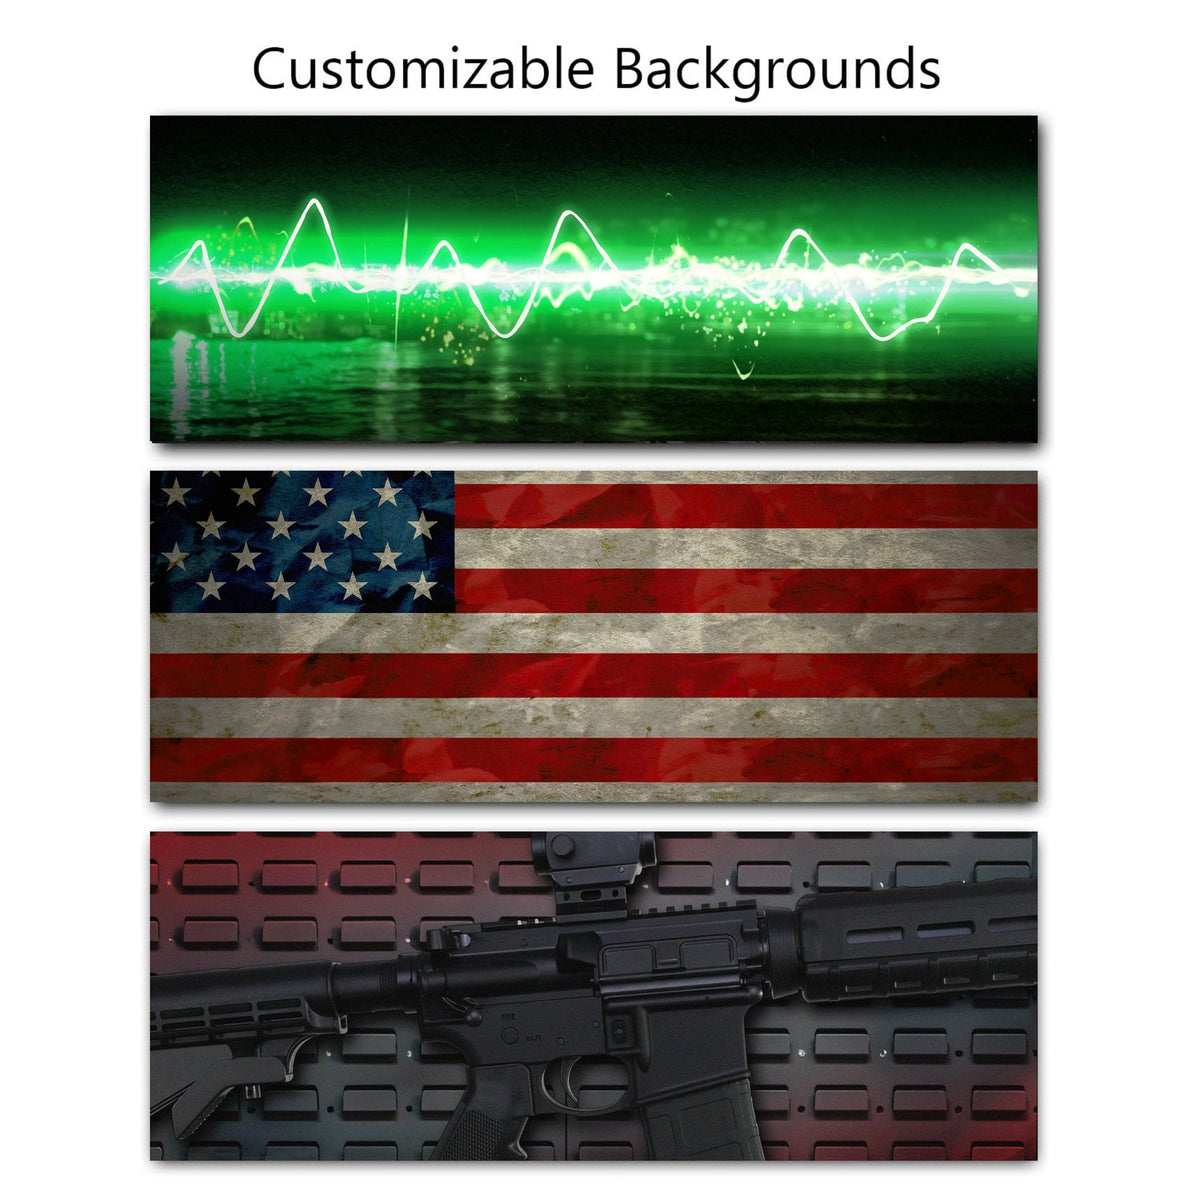 Select from multiple gun background options to fit your decor style